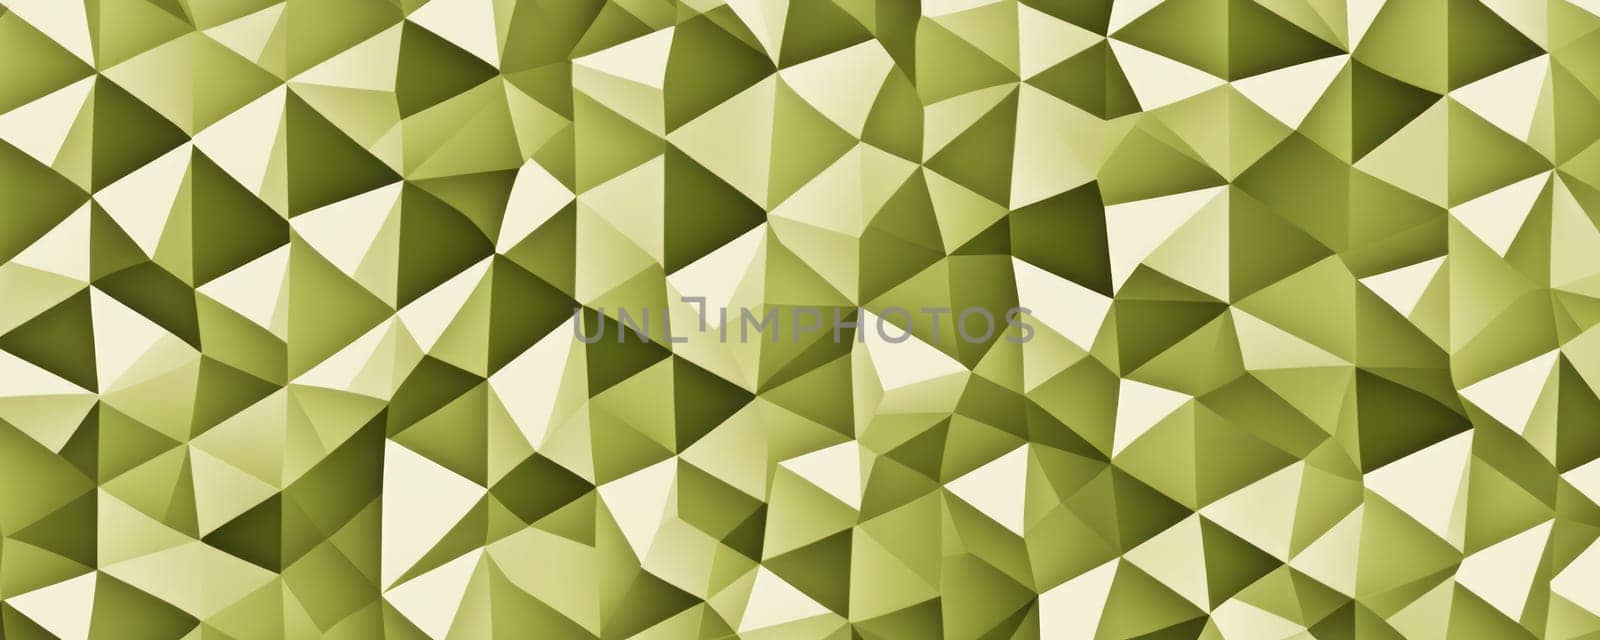 Tessellated Shapes in Olive and Antique white by nkotlyar